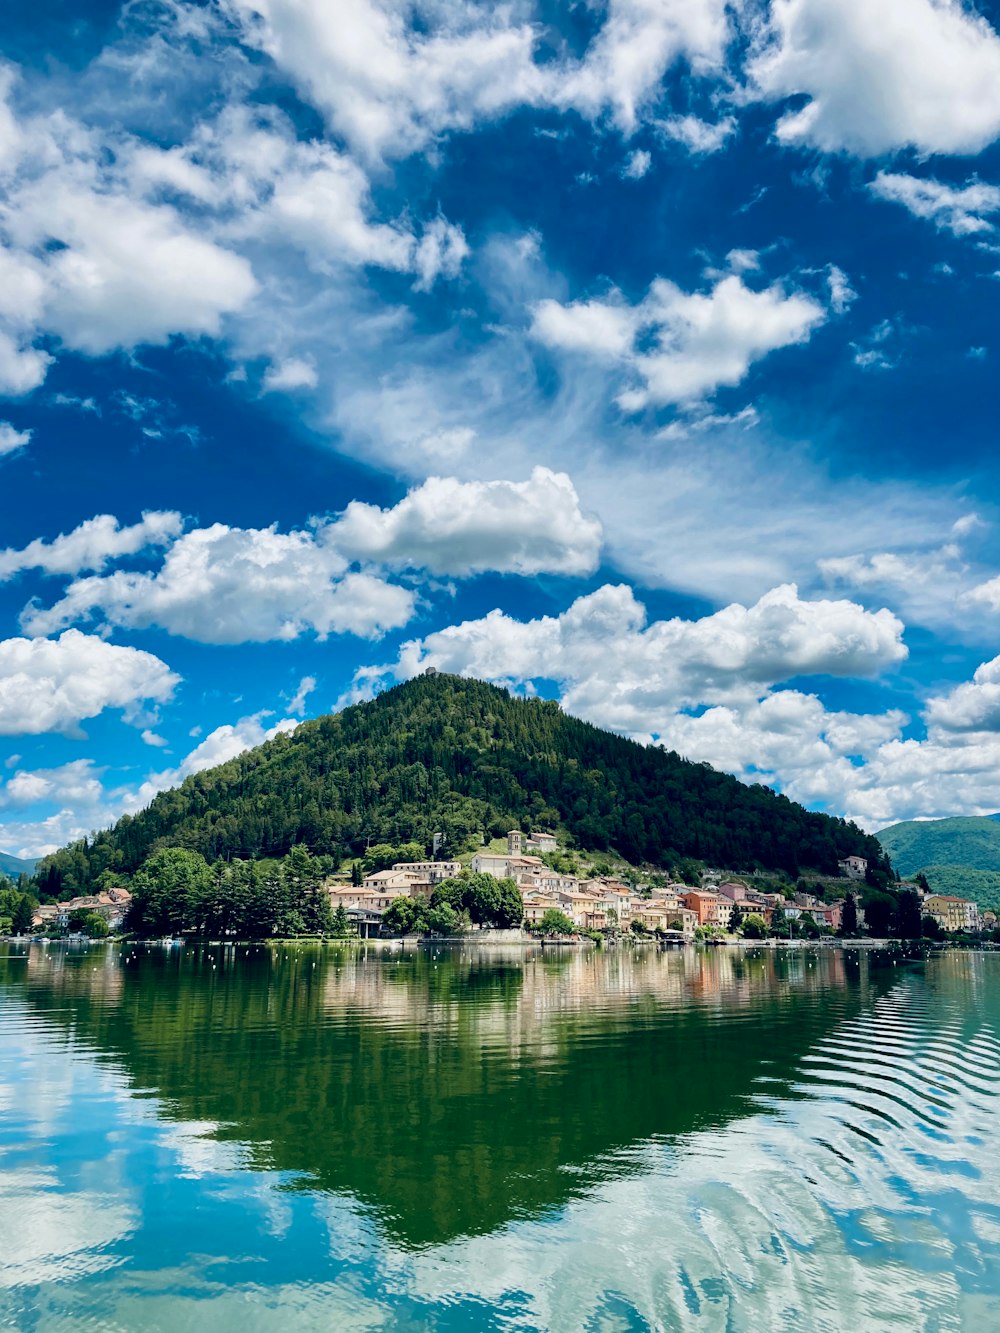 green and brown mountain beside body of water under blue and white cloudy sky during daytime